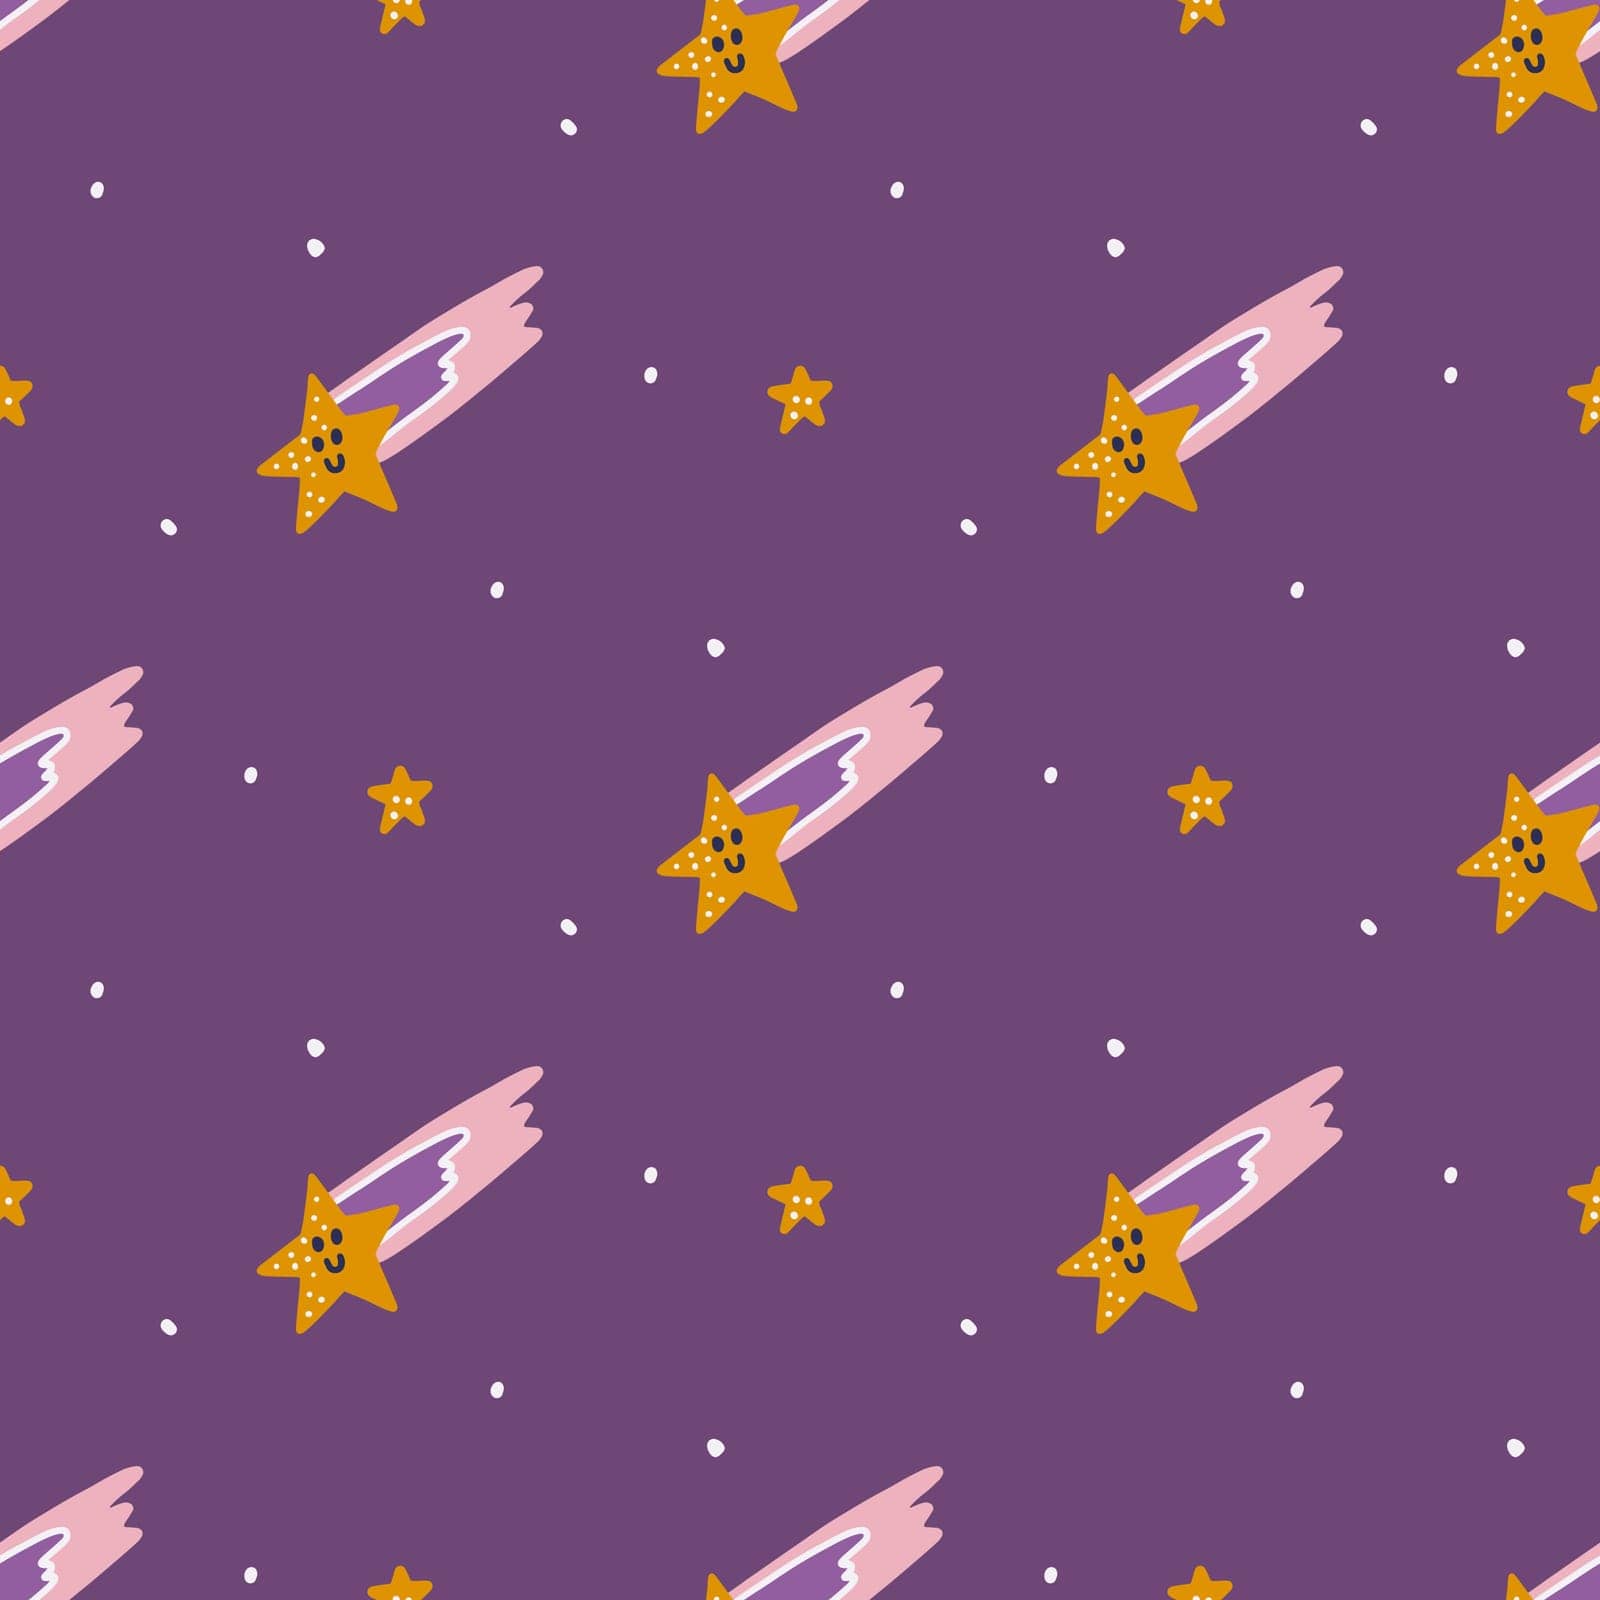 Cute cartoon stars on purple background, vector seamless pattern, children's print for fabric, paper products.